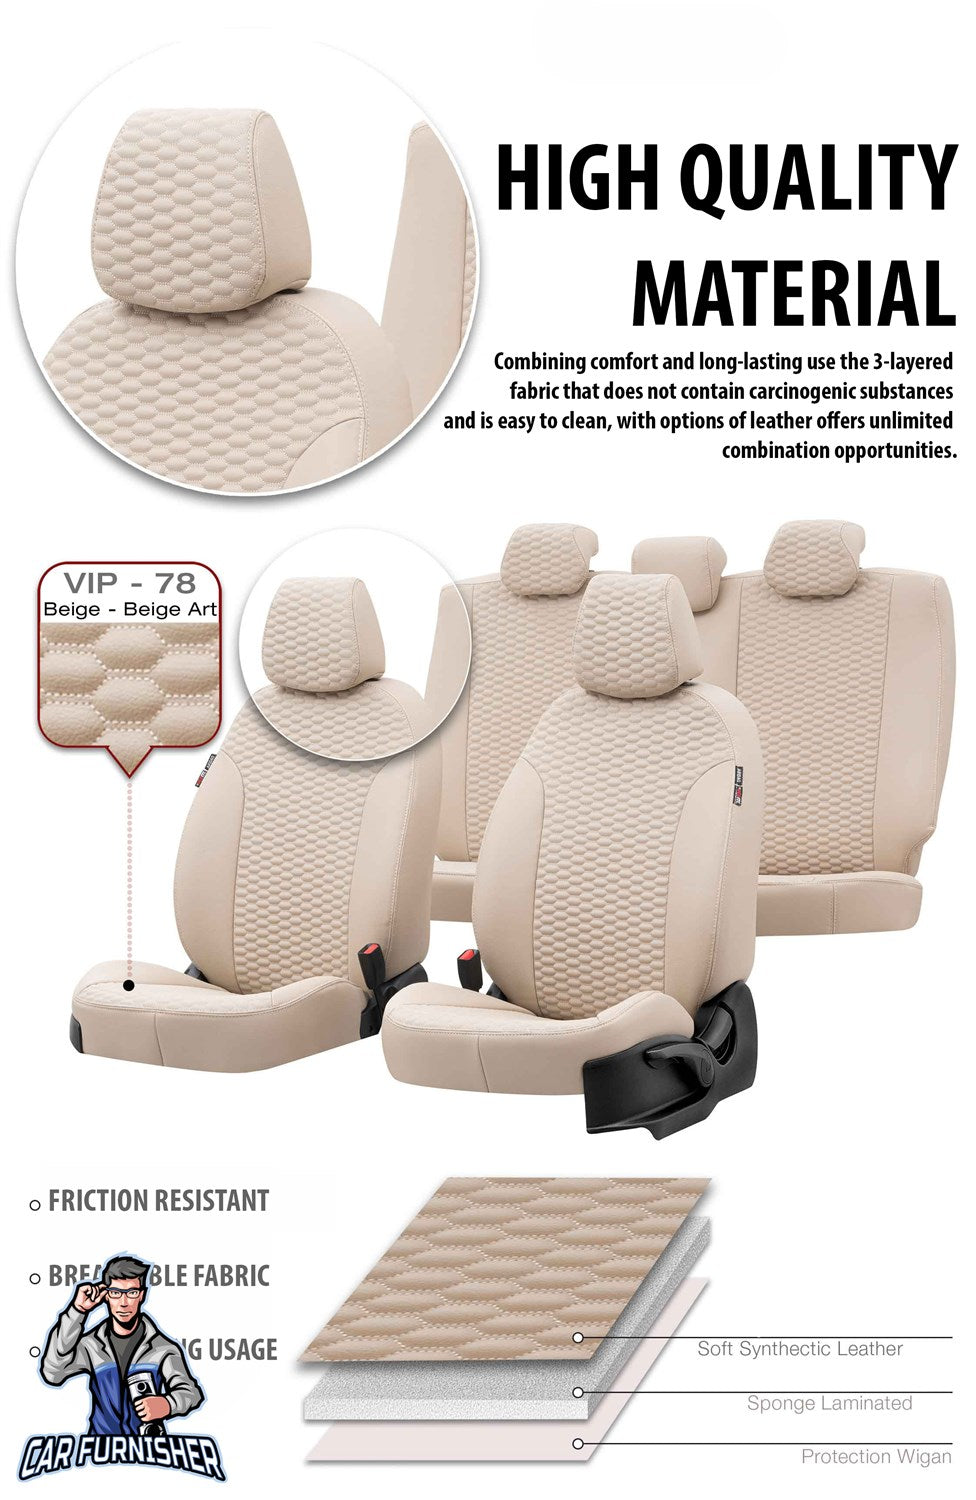 Nissan Almera Seat Covers Tokyo Leather Design Dark Gray Leather